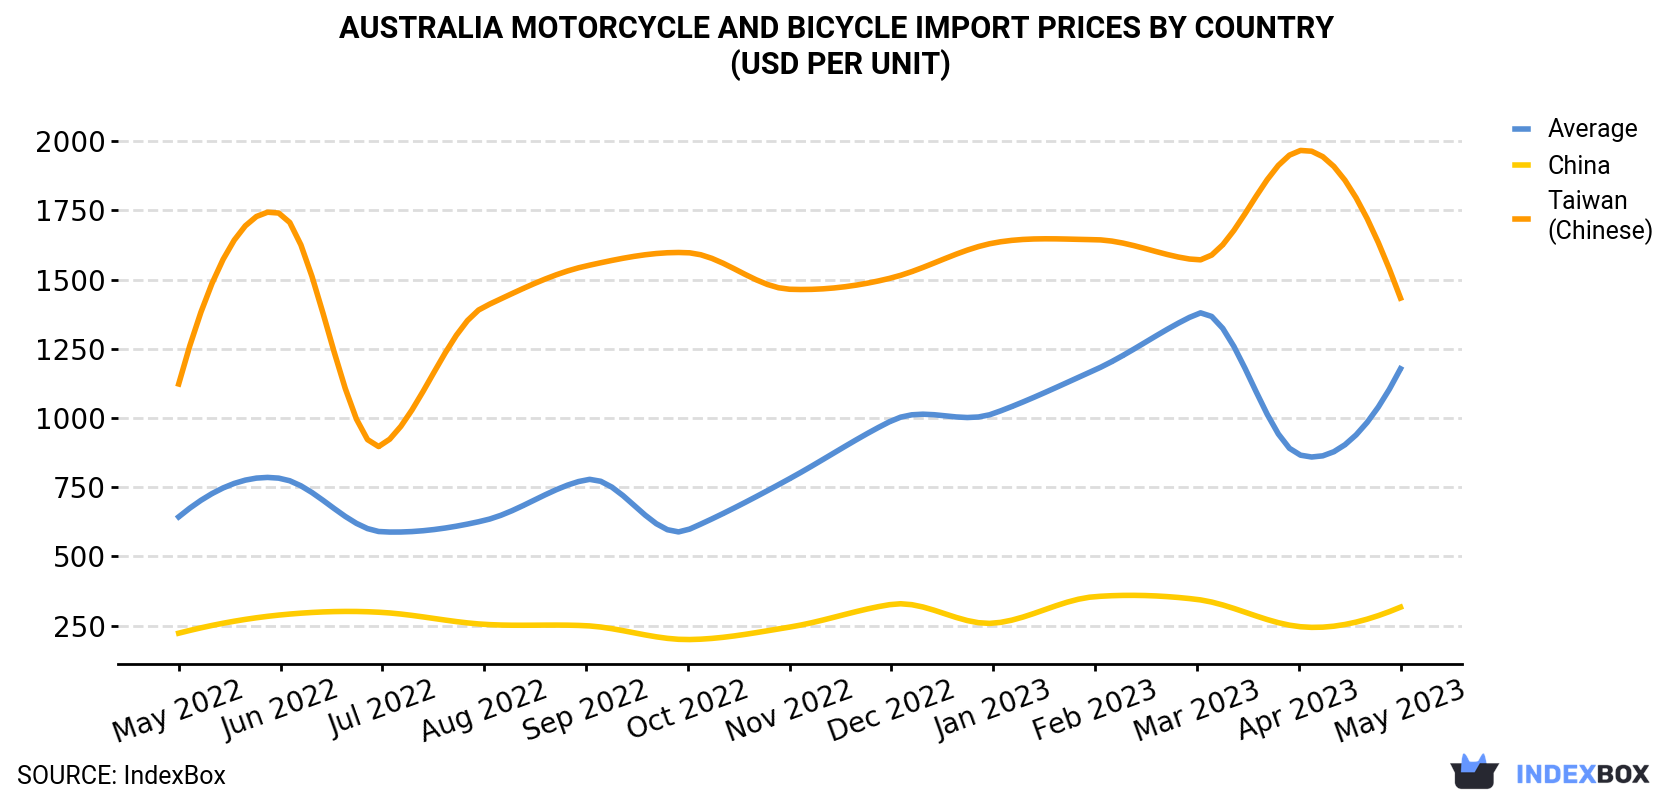 Australia Motorcycle And Bicycle Import Prices By Country (USD Per Unit)